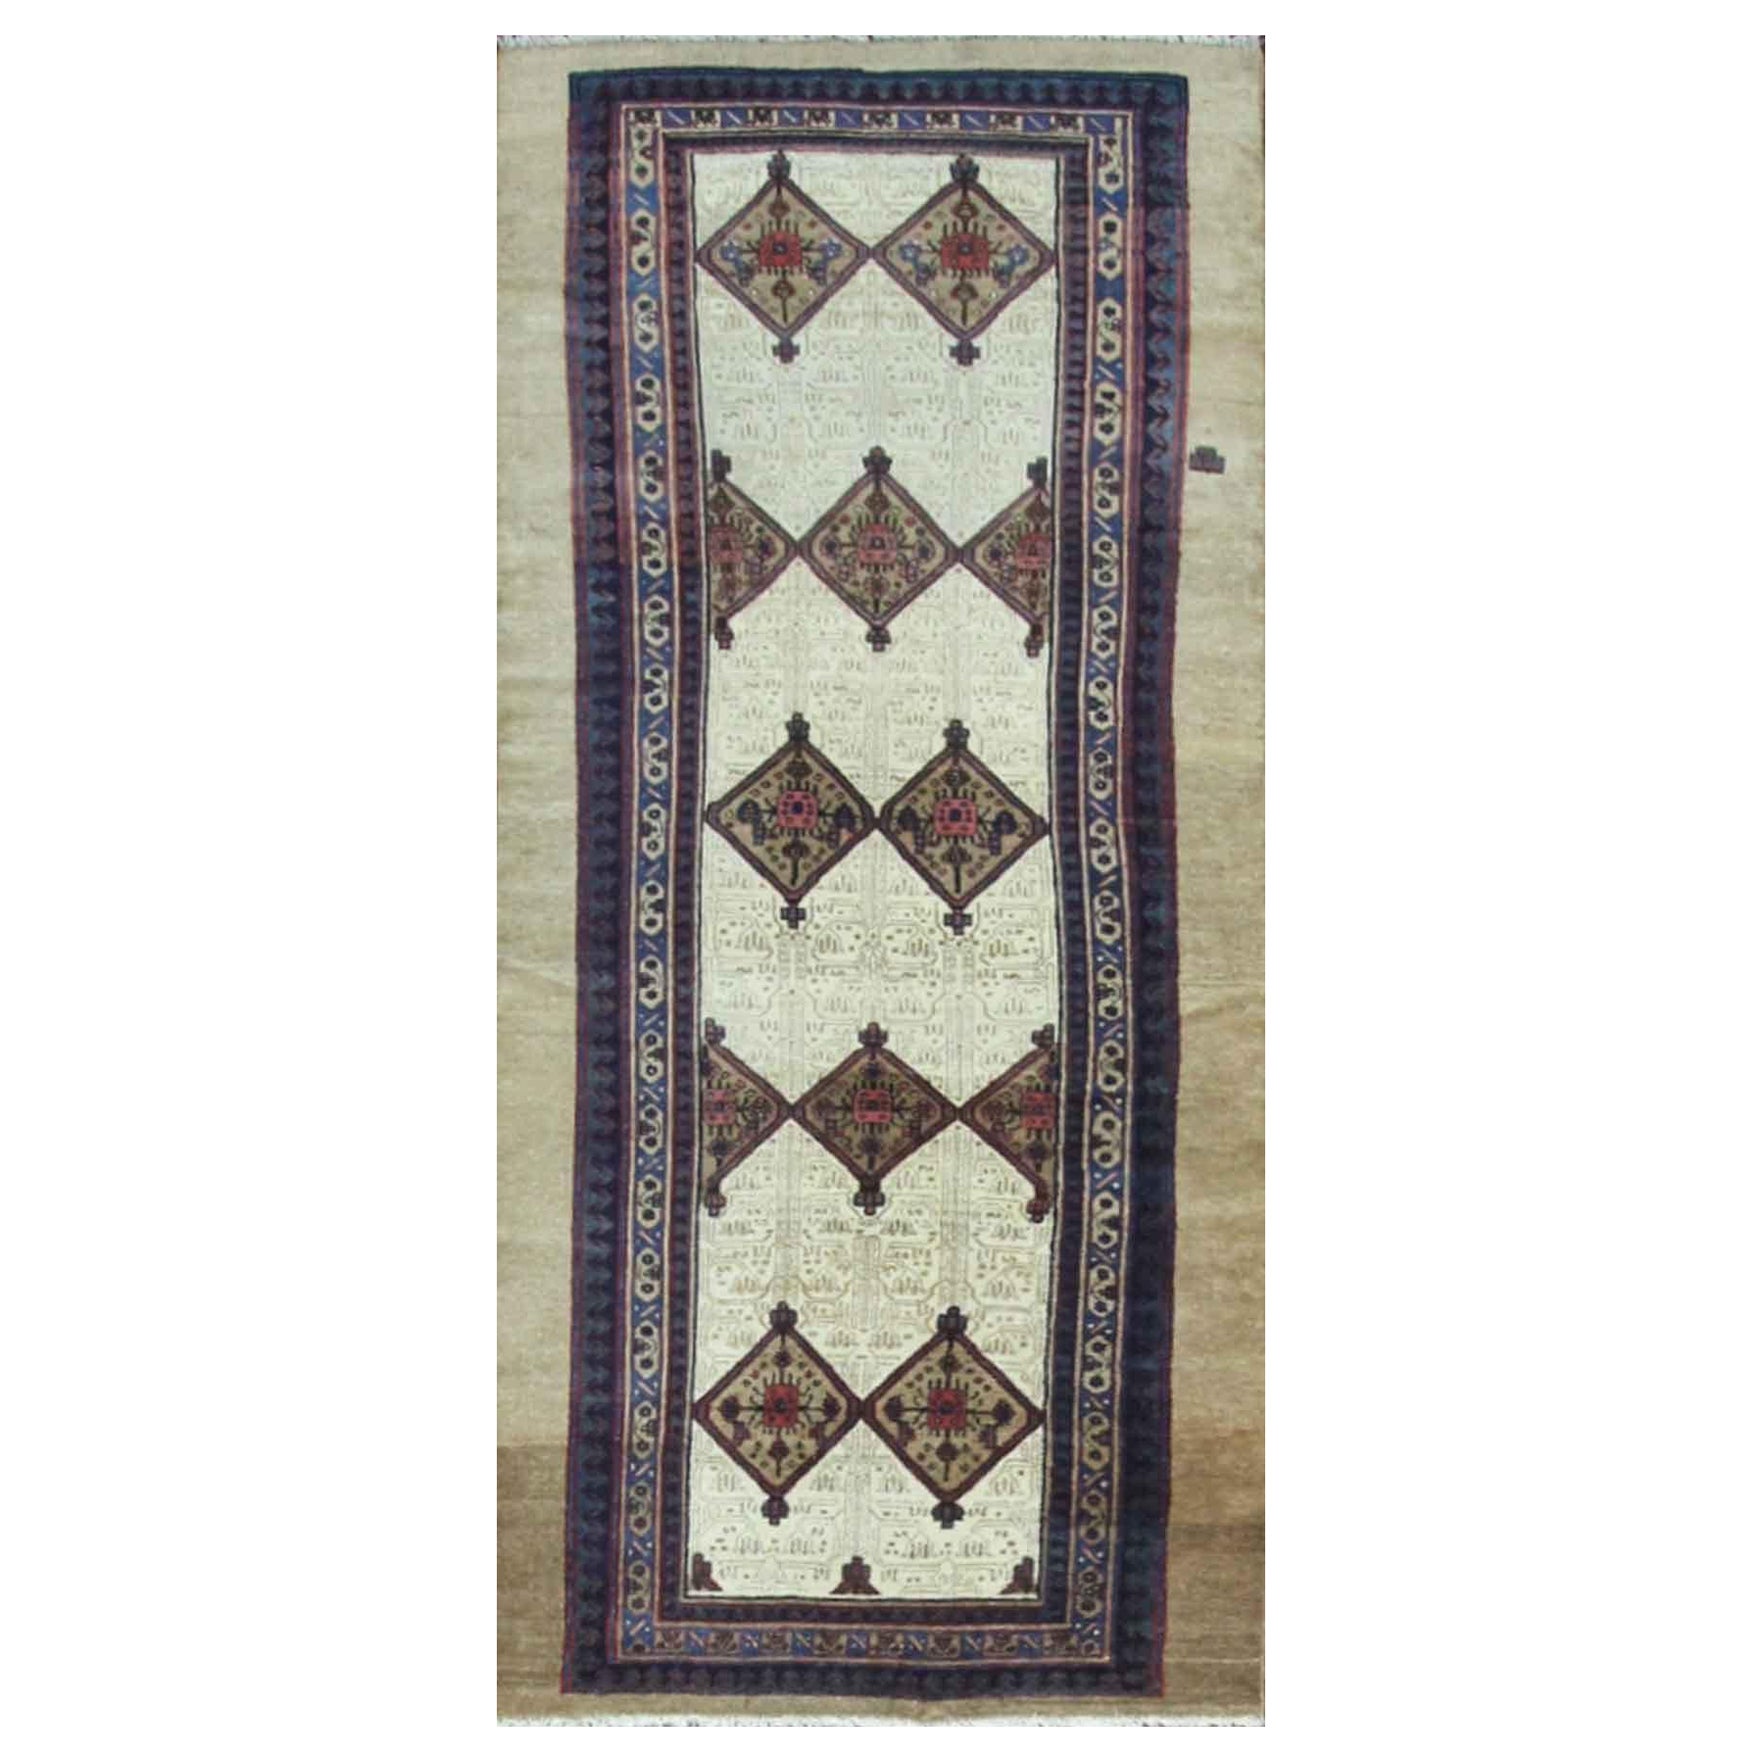 Antique Persian Serab/Serapi Gallery Size Rug, Camel Color, 4'6" x 10'4" c-1880 For Sale